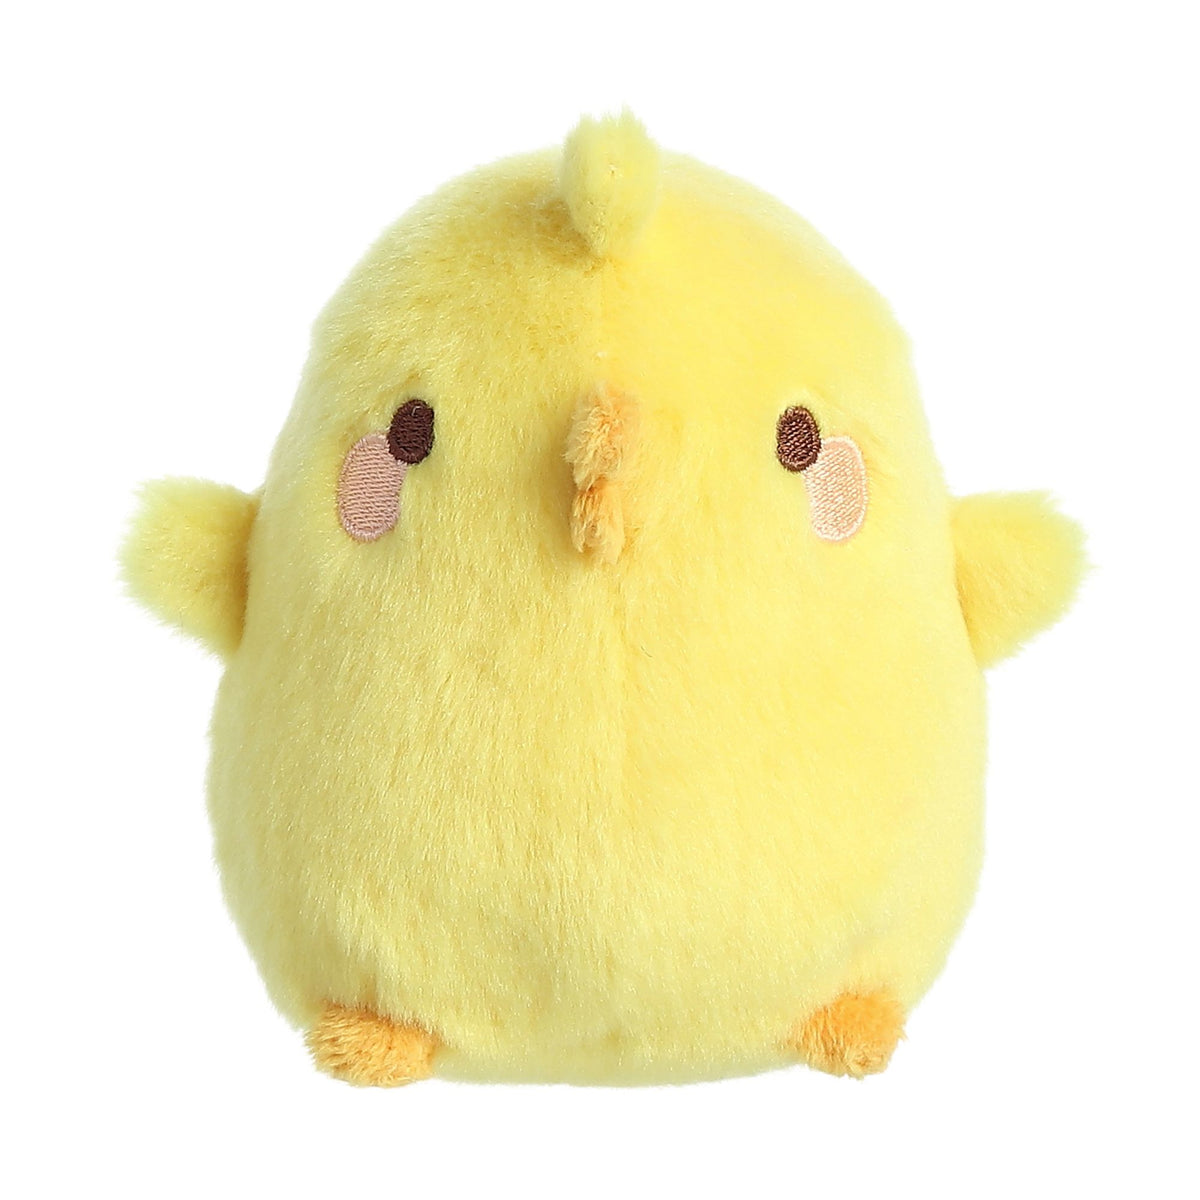 Piu Piu chick plush from Molang plush, in sunshine-yellow color, symbolizes joy and affection